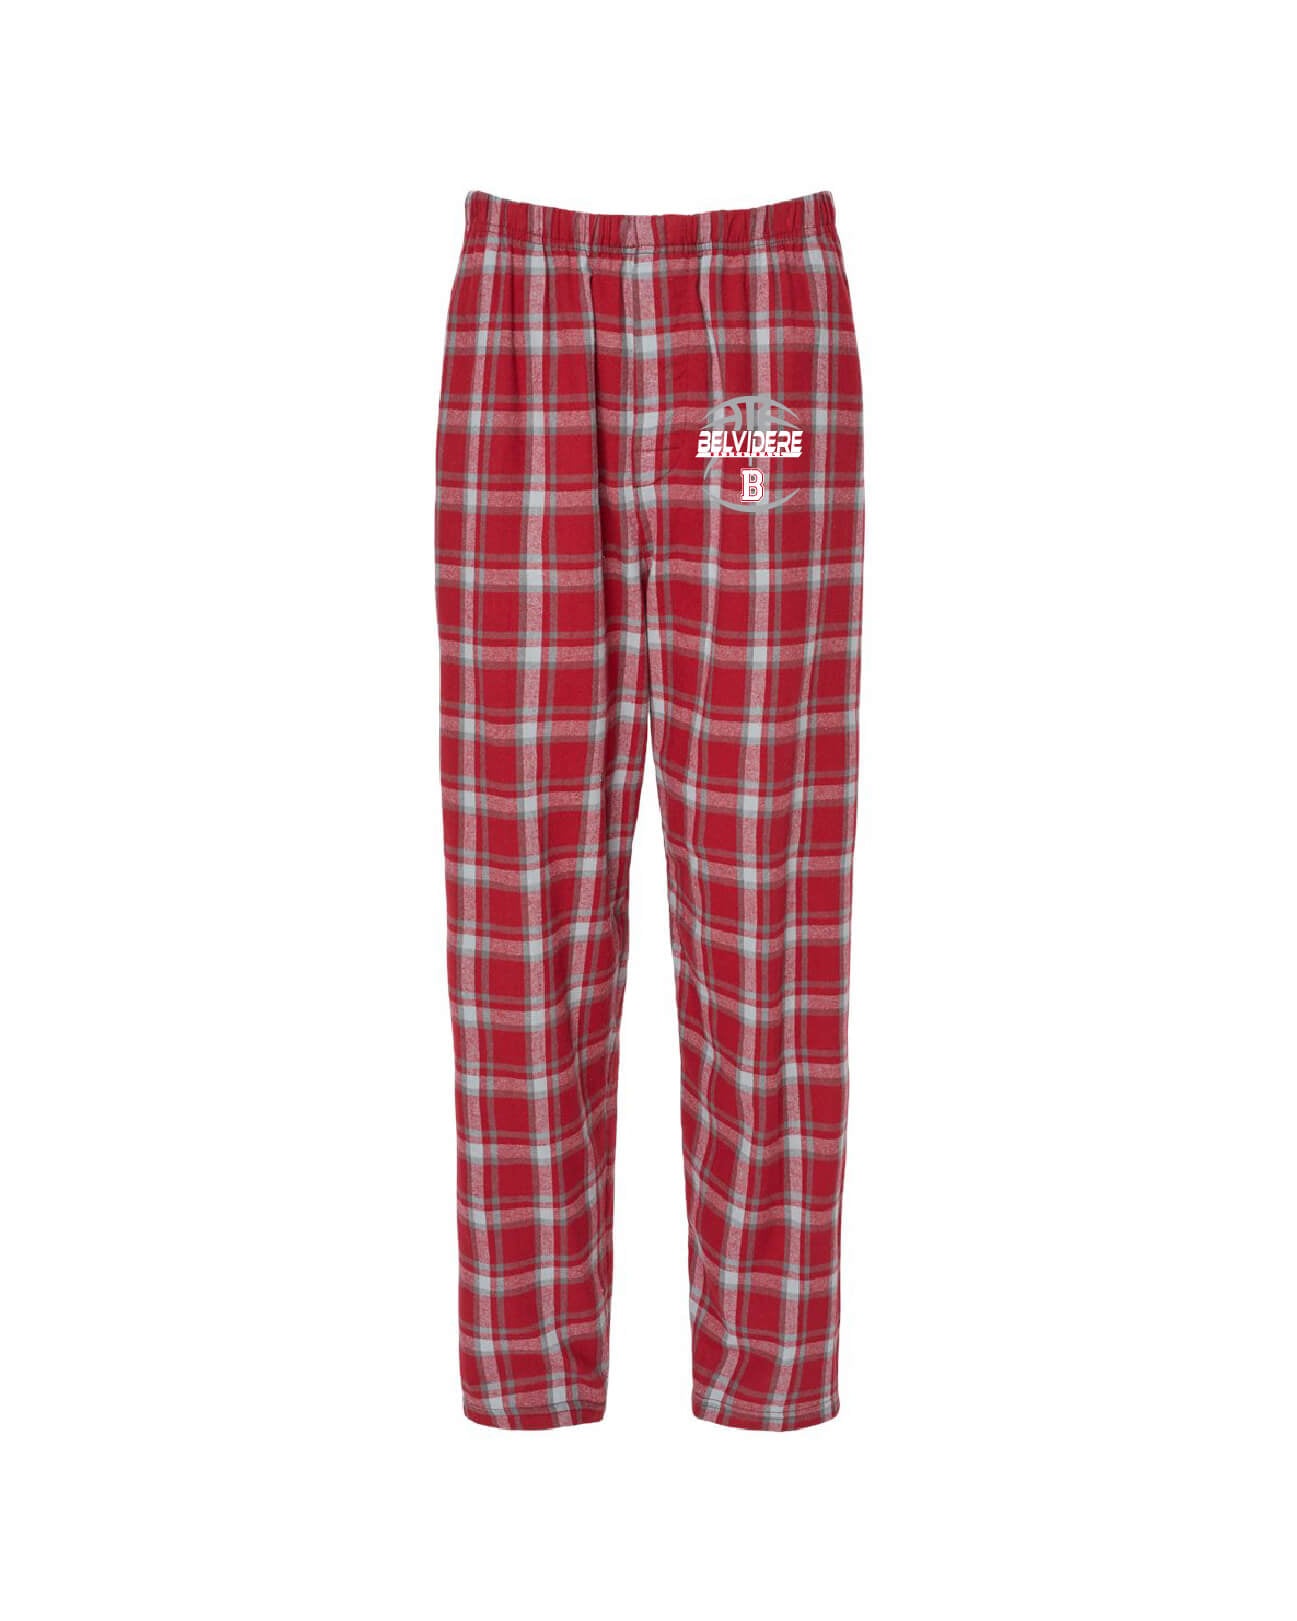 Boxercraft Flannel Pants red